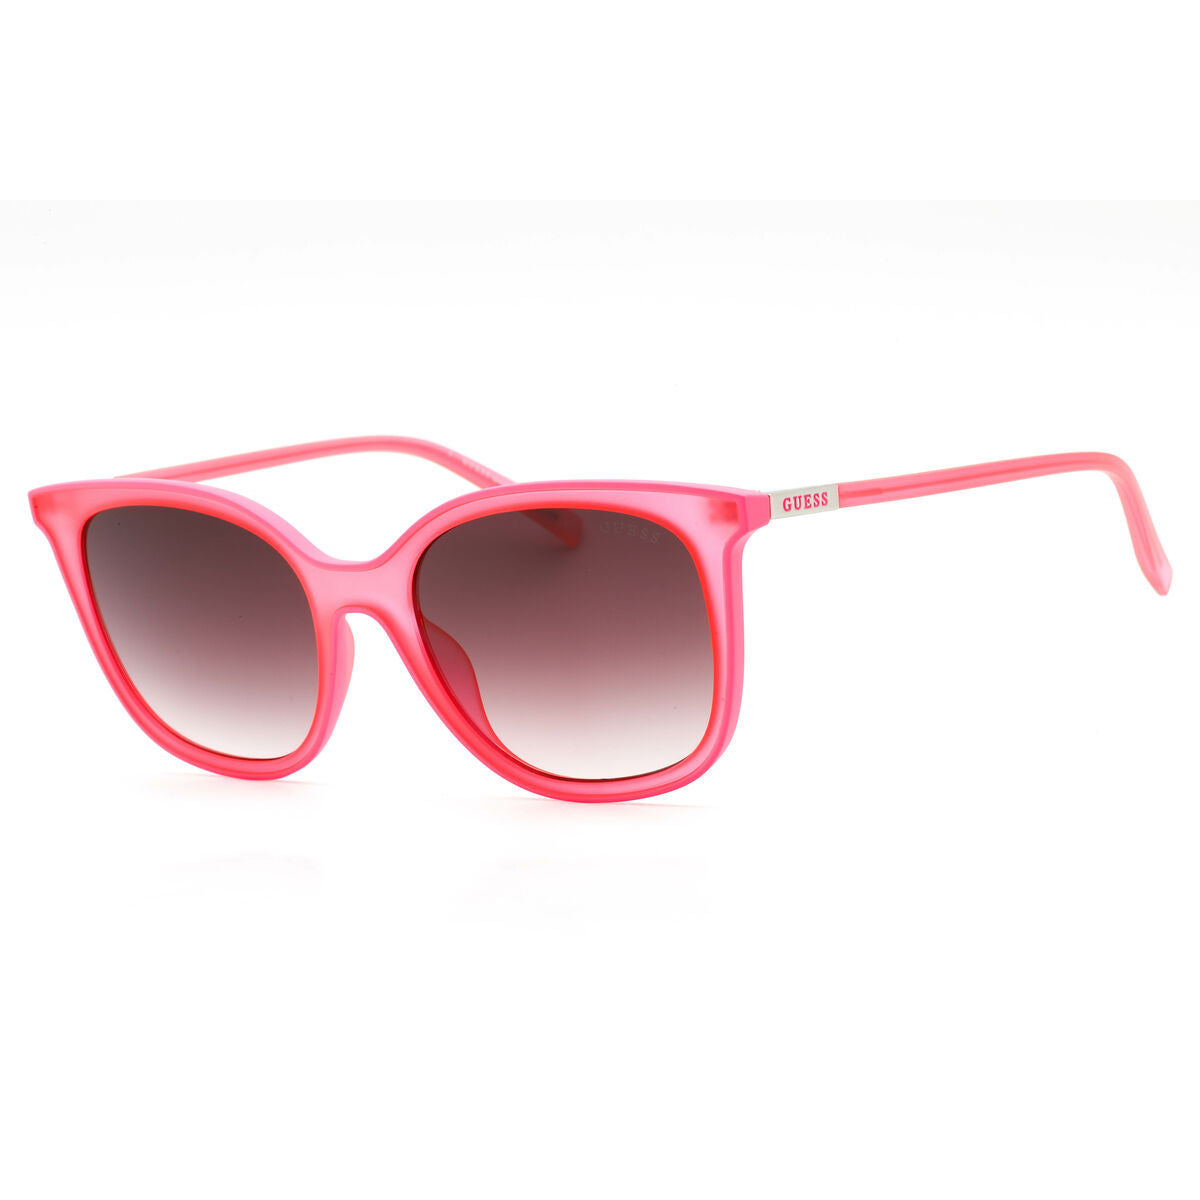 Guess Ladies' Sunglasses  Gu3060-74f  55 Mm Gbby2 In Pink